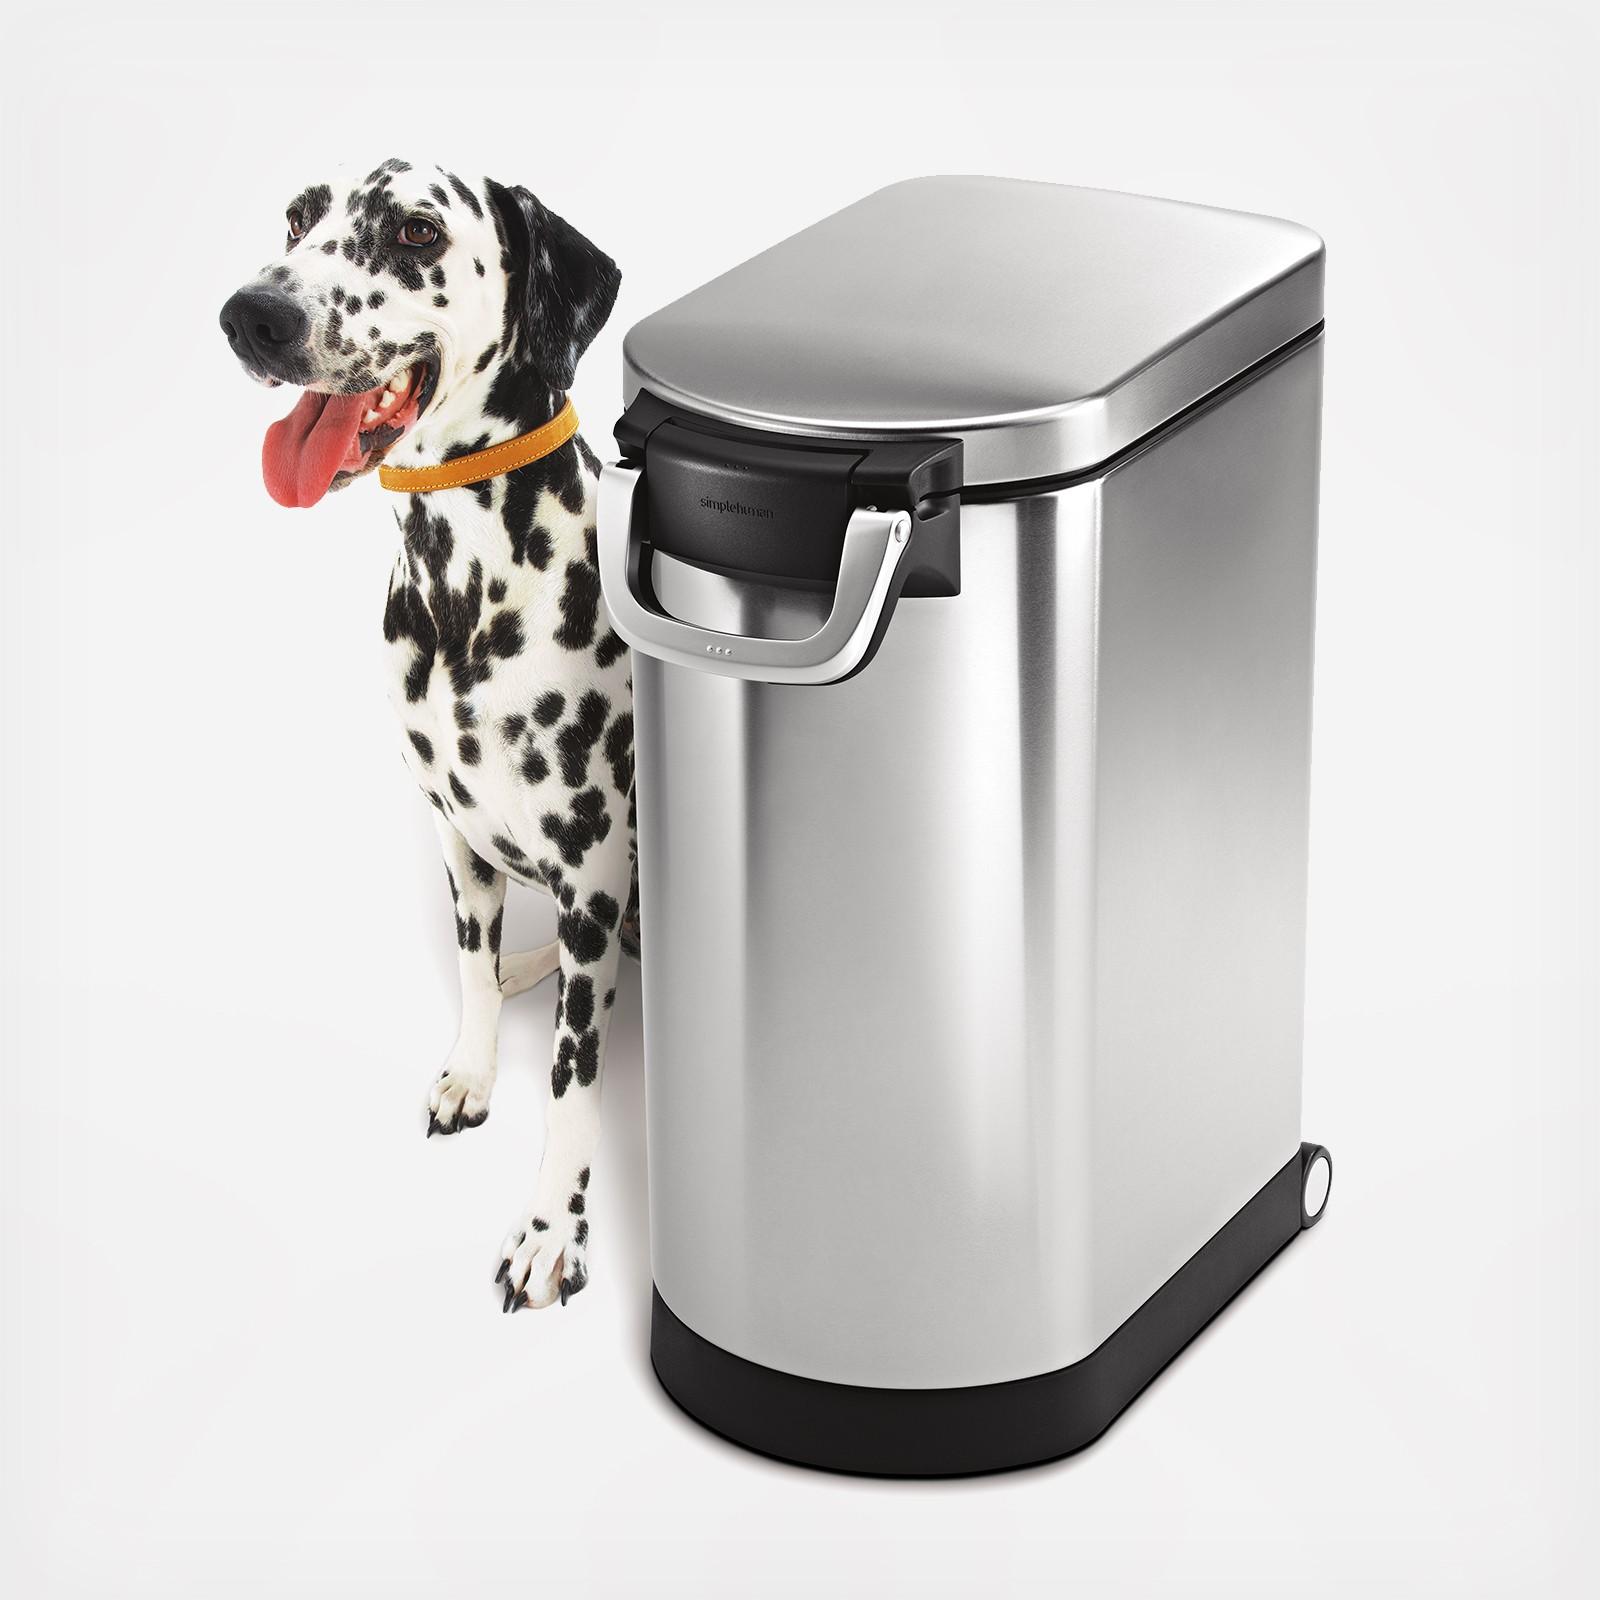 This Simplehuman Pet Food Storage Container Is The Best Gift We've Received  Off Our Wedding Registry